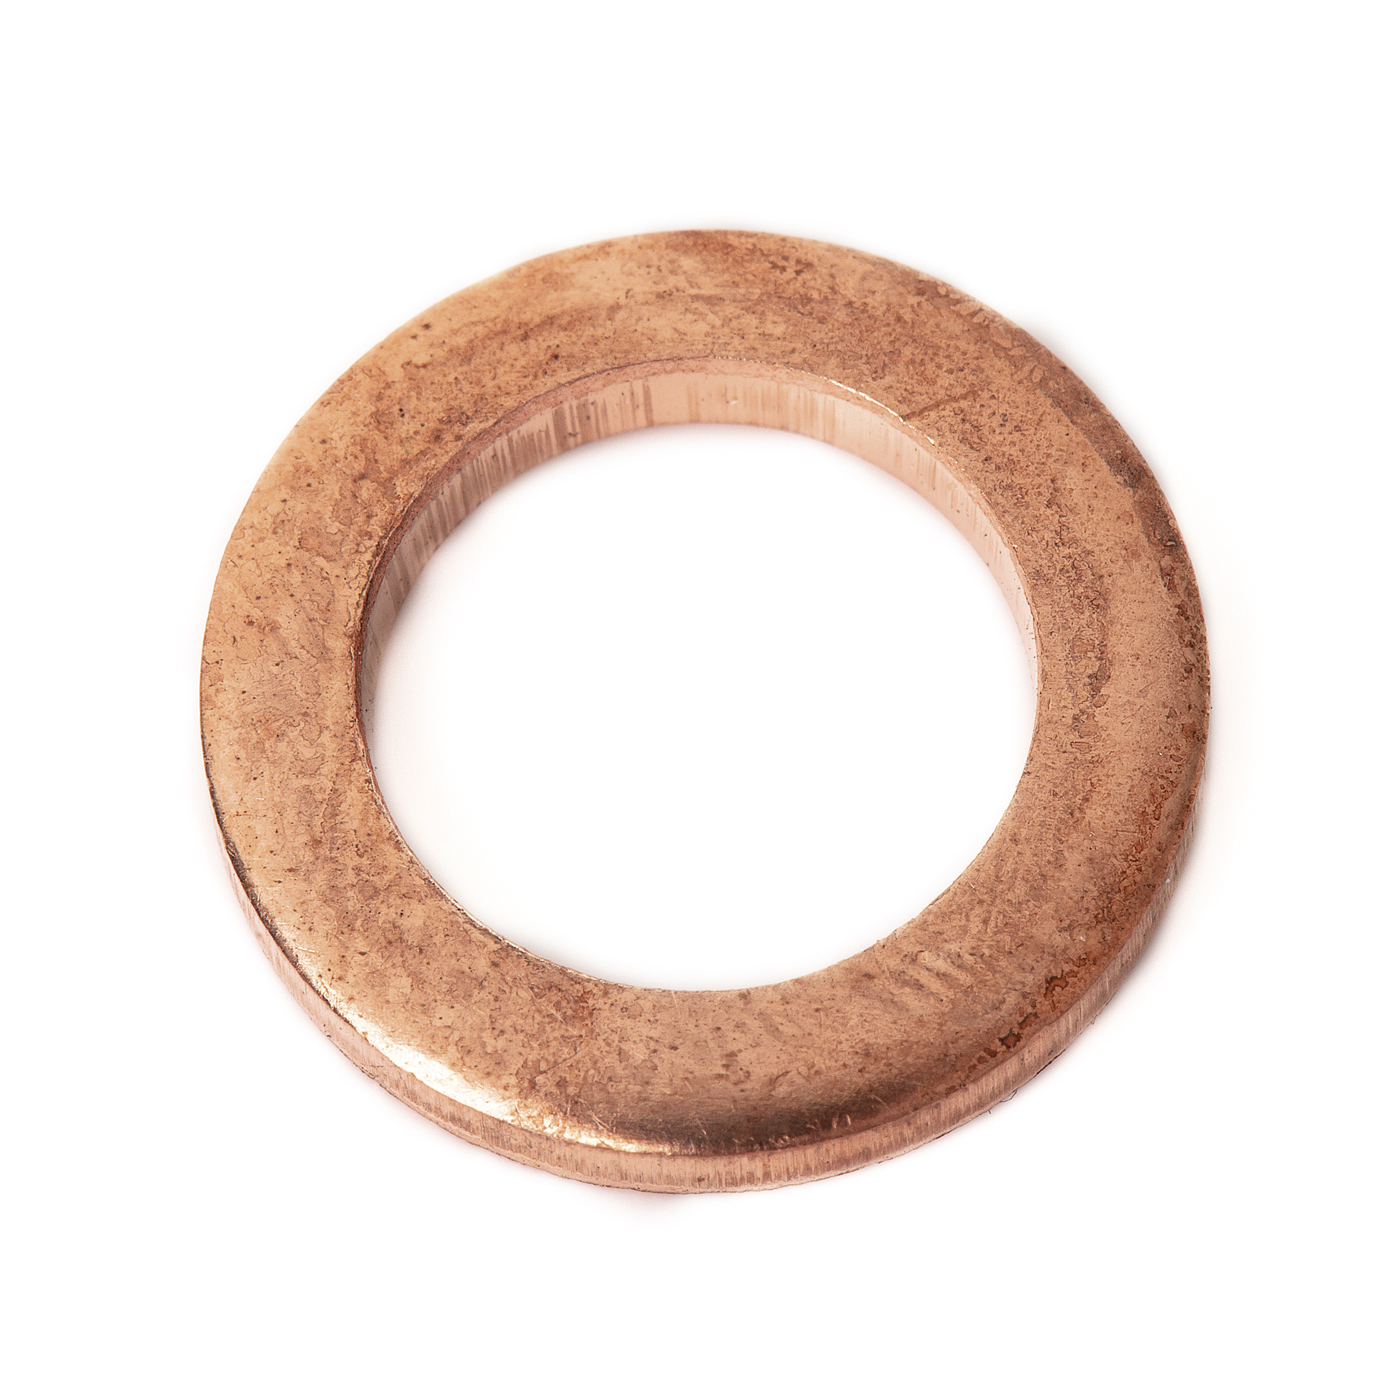 Copper Rings, for Ring Stretcher and Reducer - 24 pieces